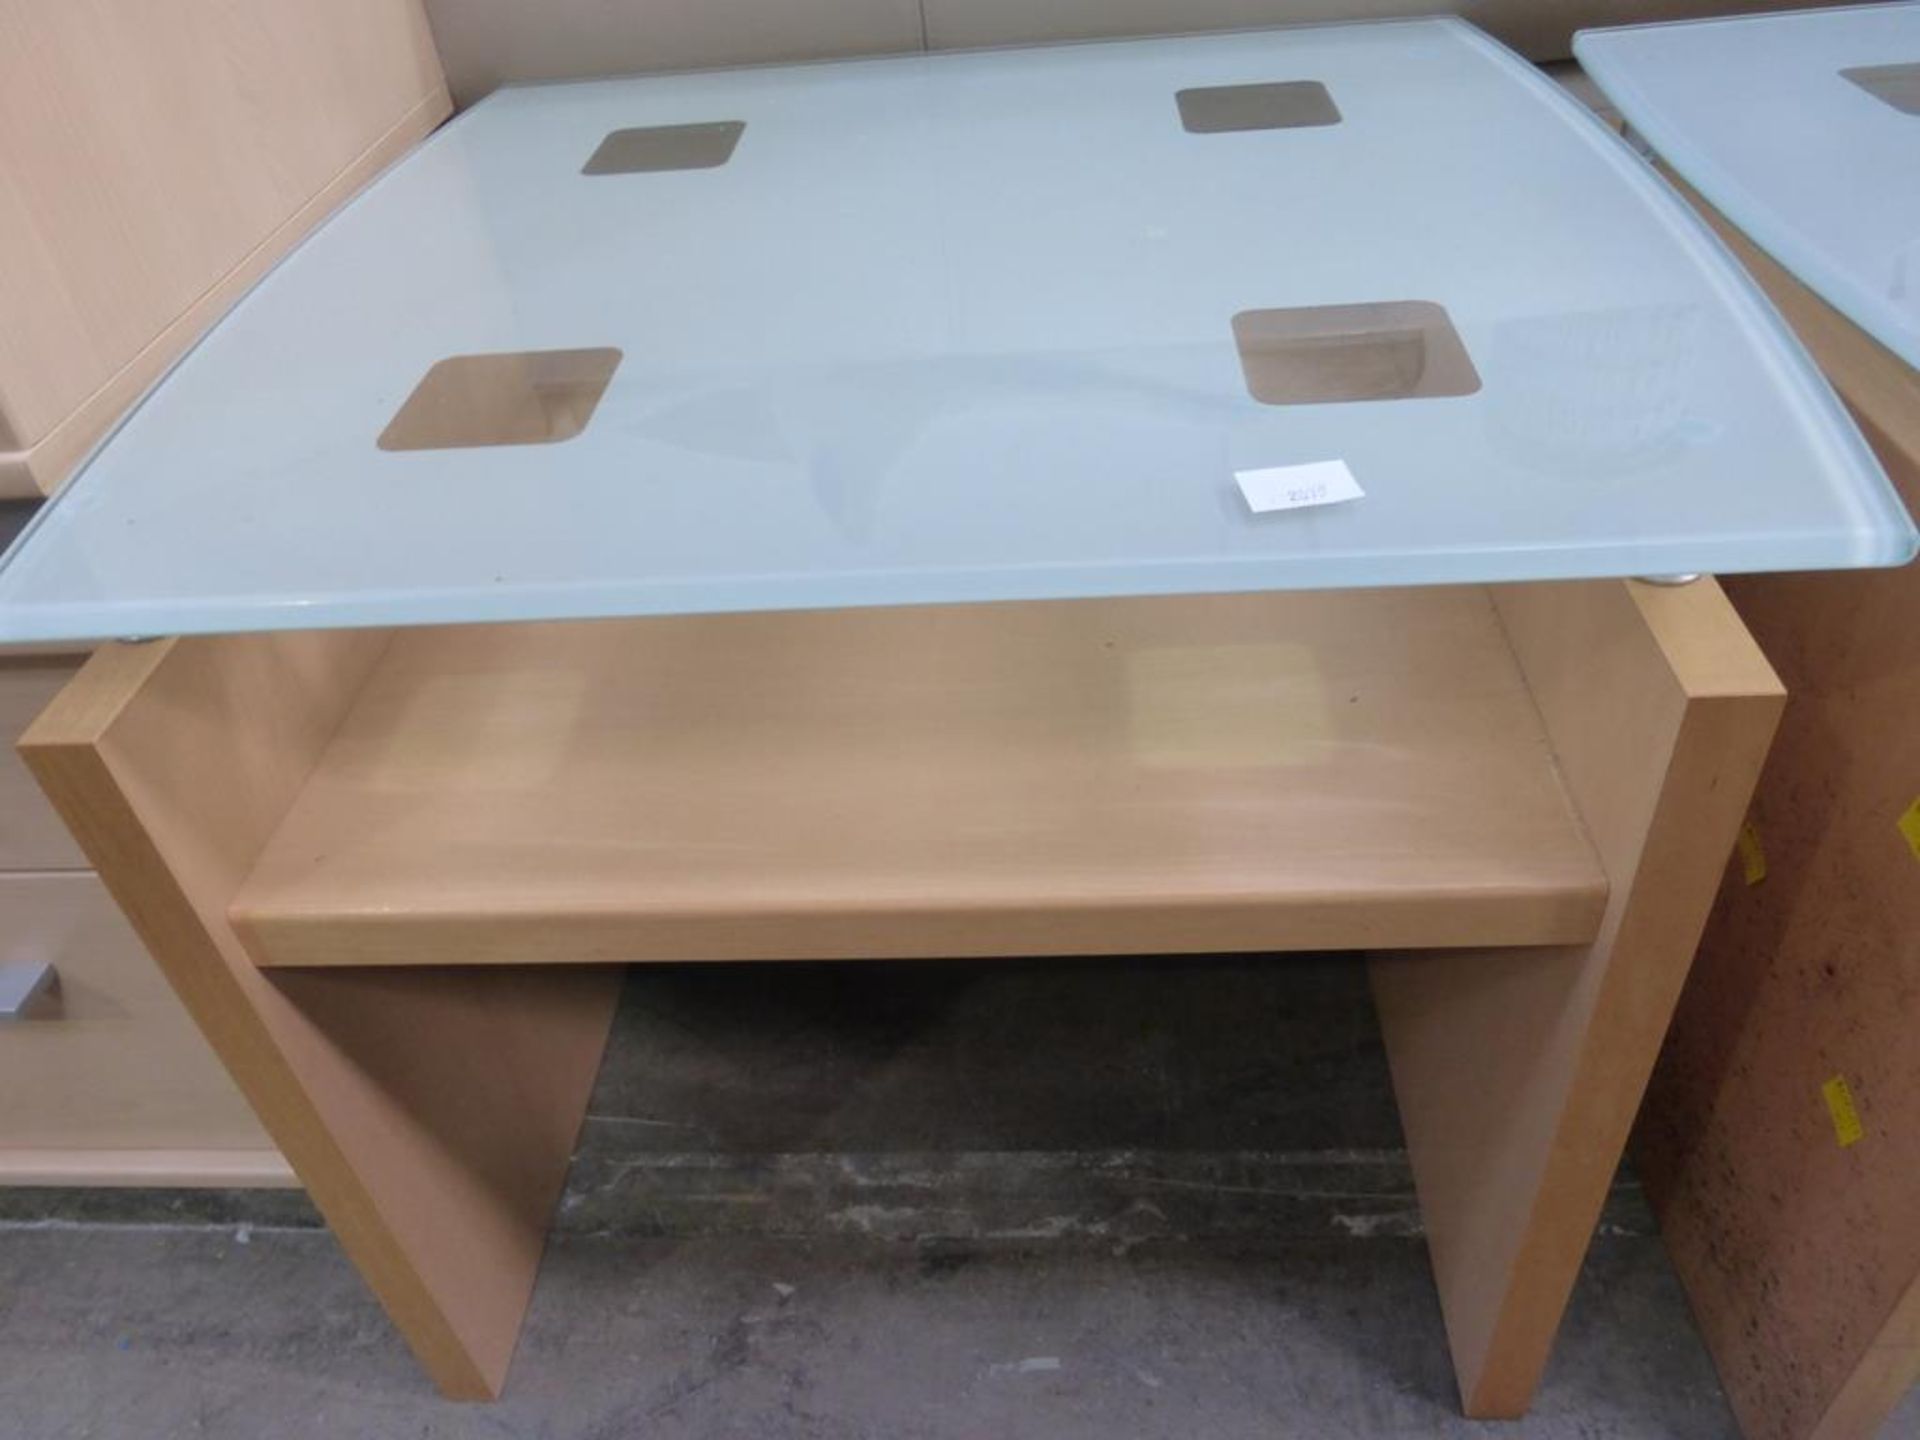 A Pair of Modern Lightwood Effect Bedside or Lamp Tables with Frosted Glass Top 52cm (est £30-£50) - Image 2 of 2